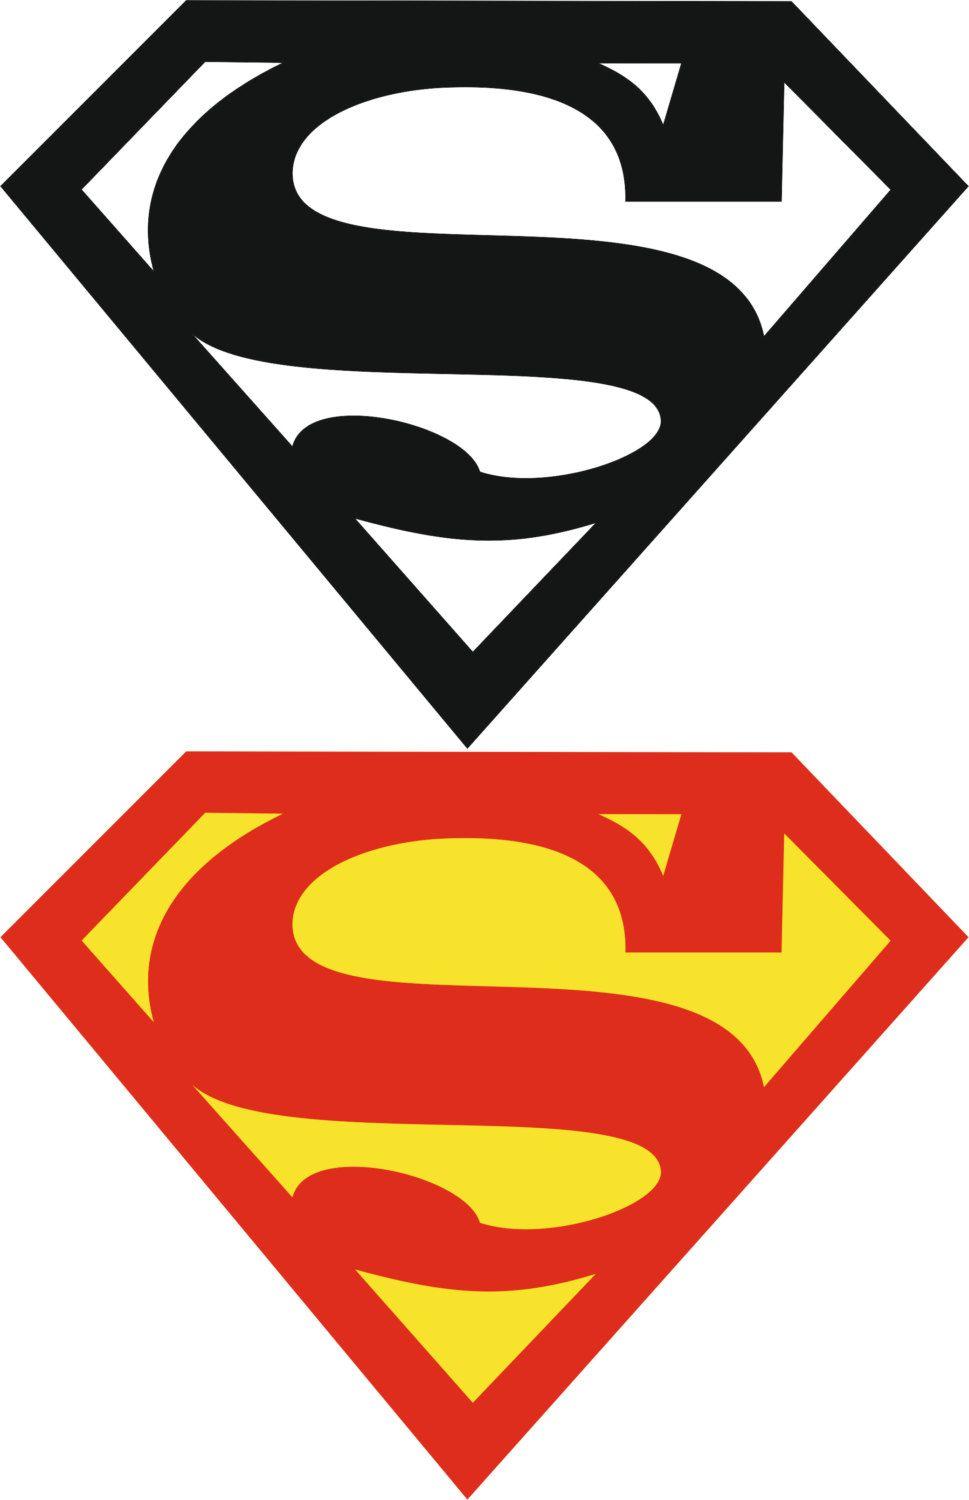 Red Black and White Superman Logo - Colord black white Superman superhero hero logo CNC Cut file Laser